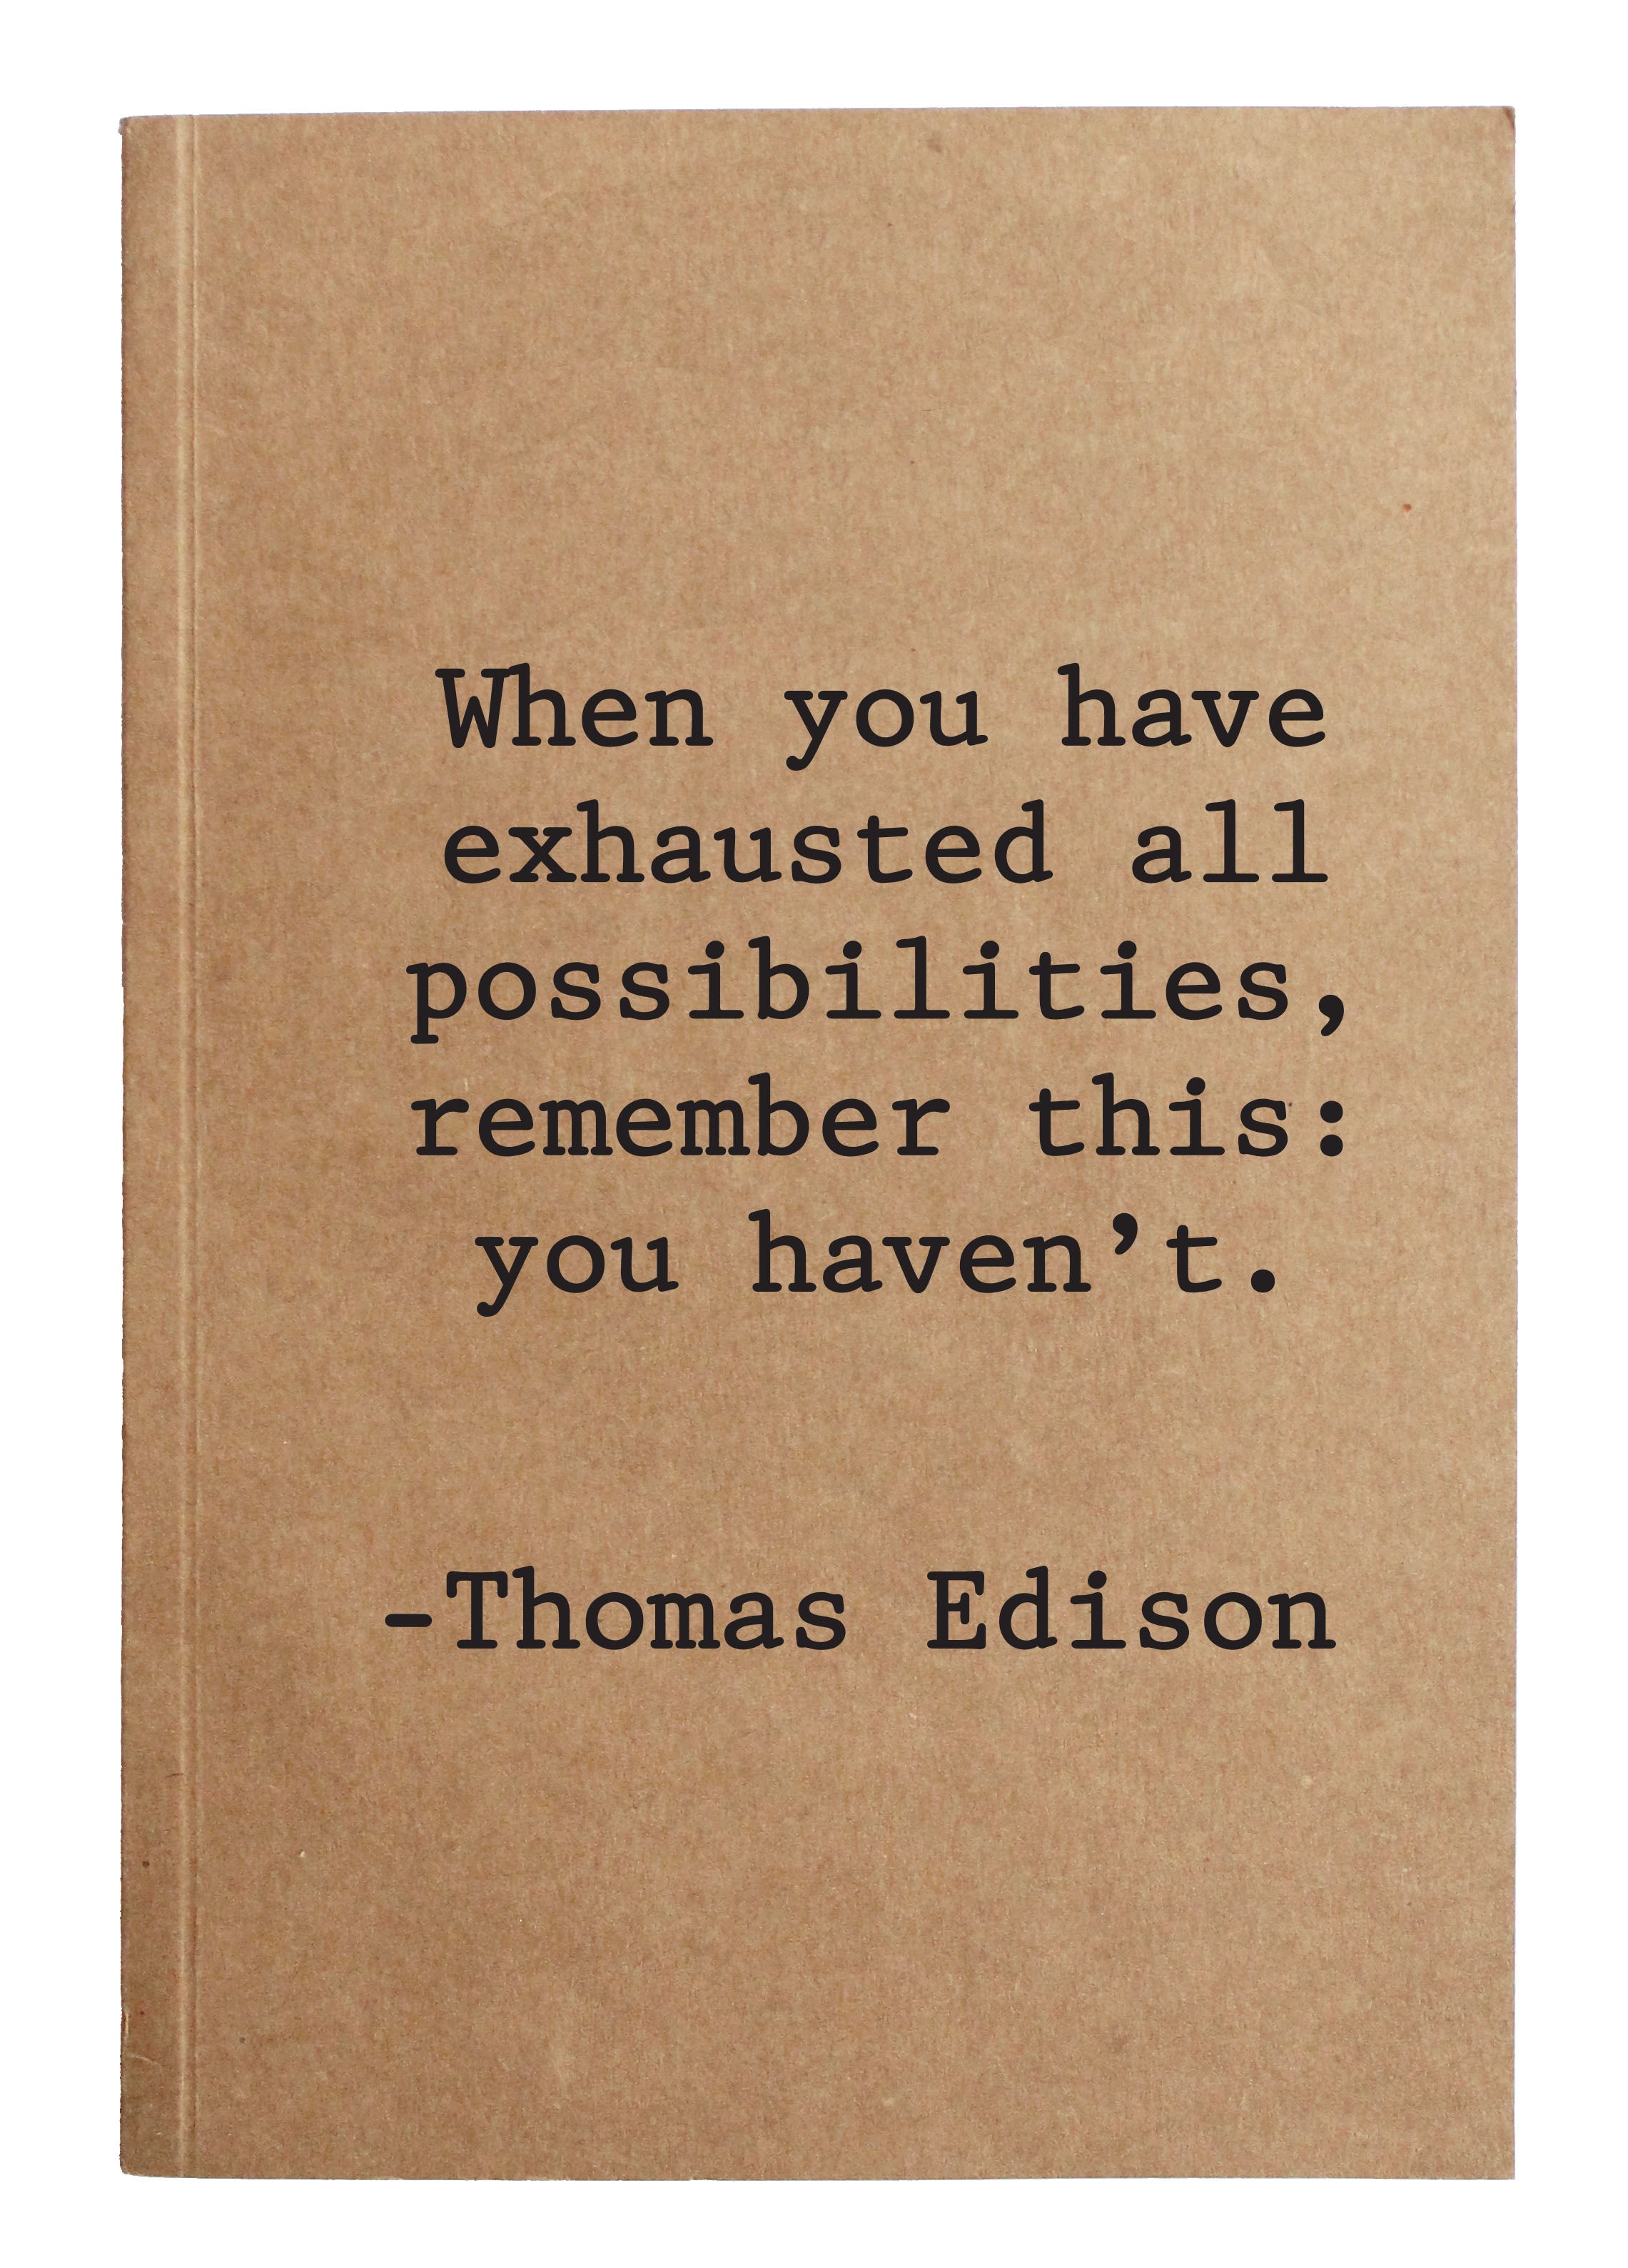 When you have exhausted all possibilities, remember this: you haven't. - Thomas Edison kraft notebook